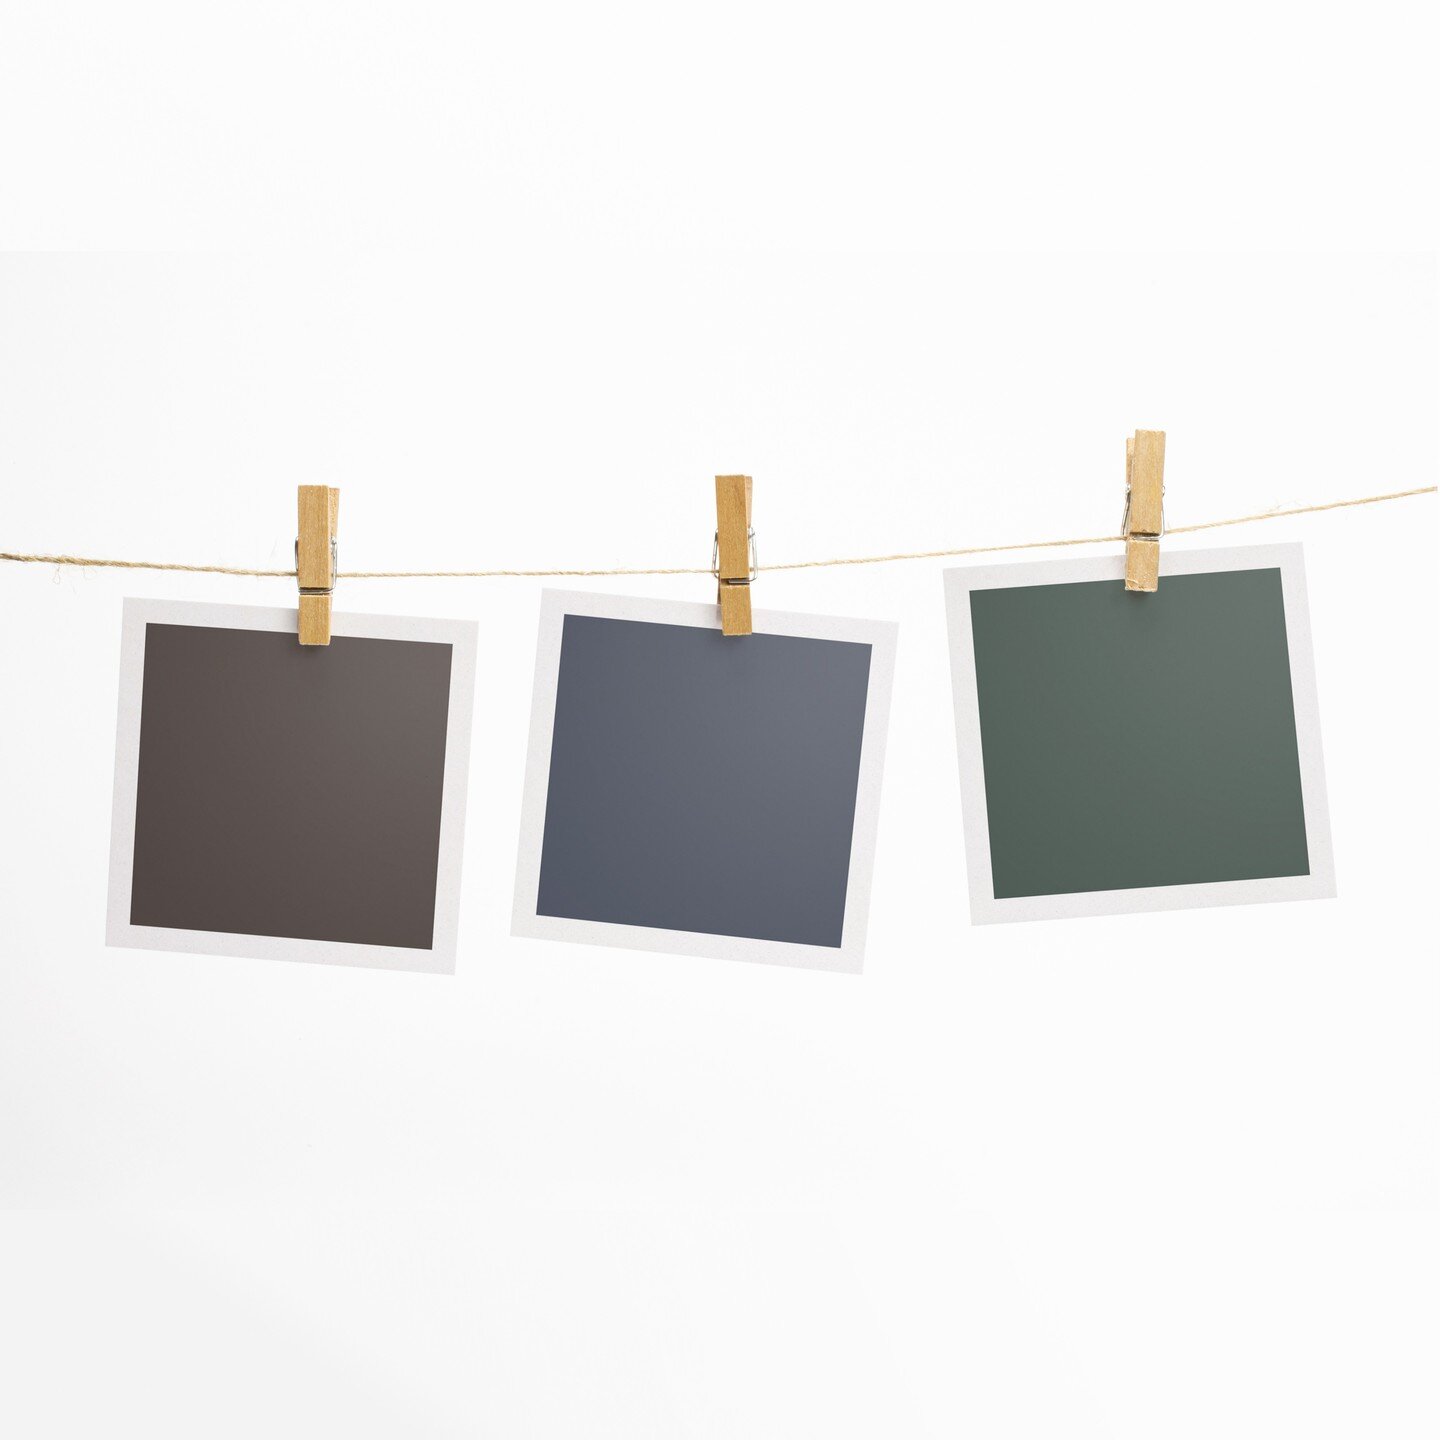 @cubicoutdoorliving have launched three new season colours for their outdoor kitchen range, introducing the Night, Pine and Coffee.
They have chosen warm and calm seasonal colours for 2023. These are intended to do one thing above all - soothe the ey